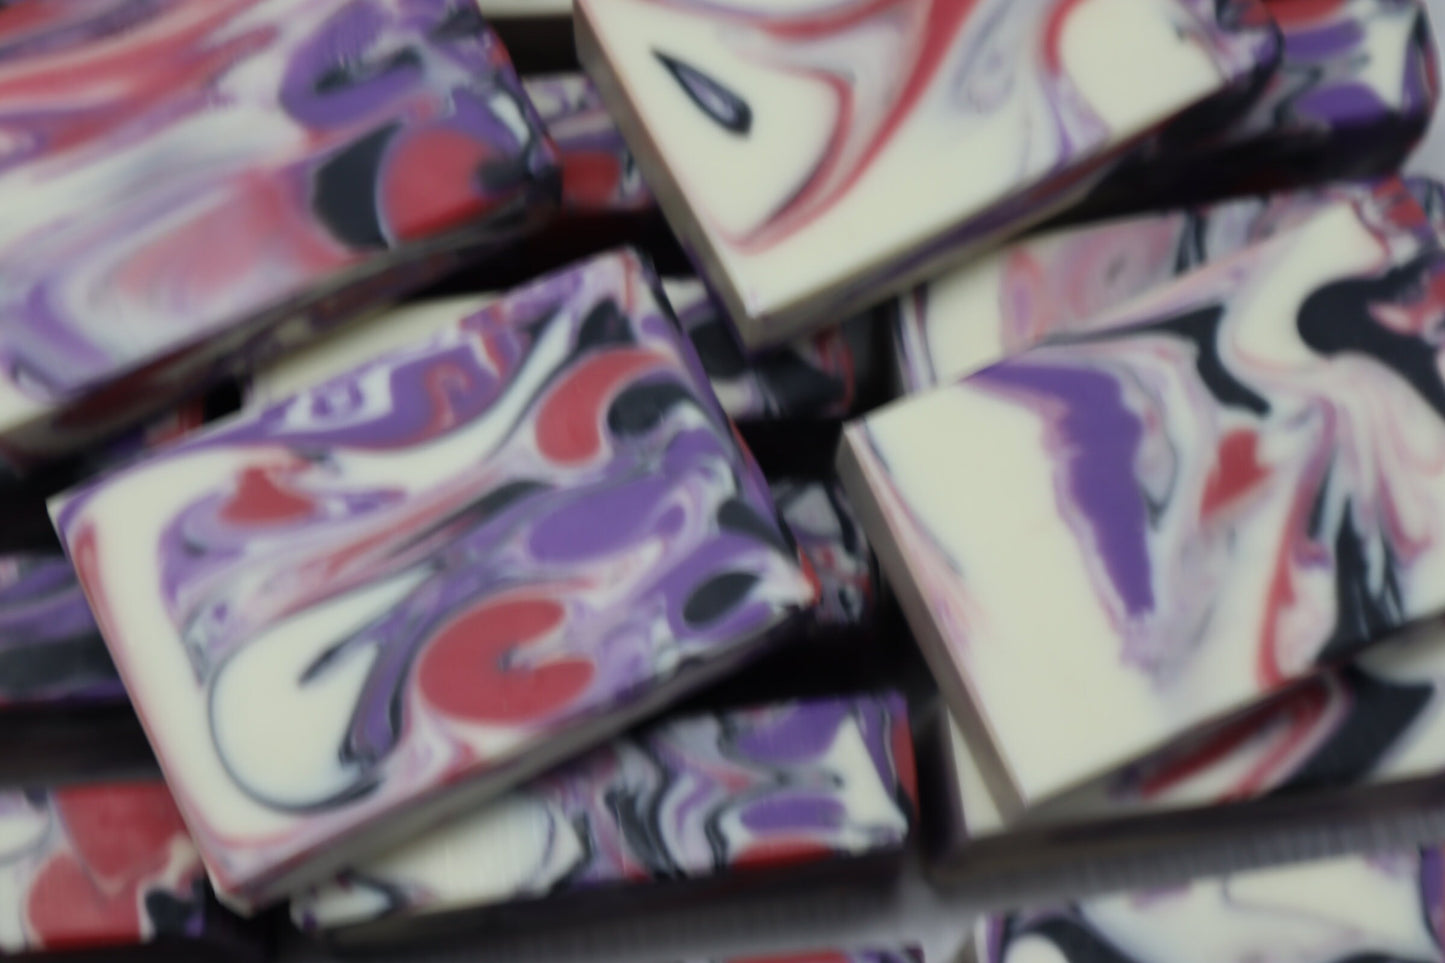 Black Raspberry Vanilla Soap, A Popular Super Lathering , bubbly, sudsy soap you will be sure to enjoy everyday!